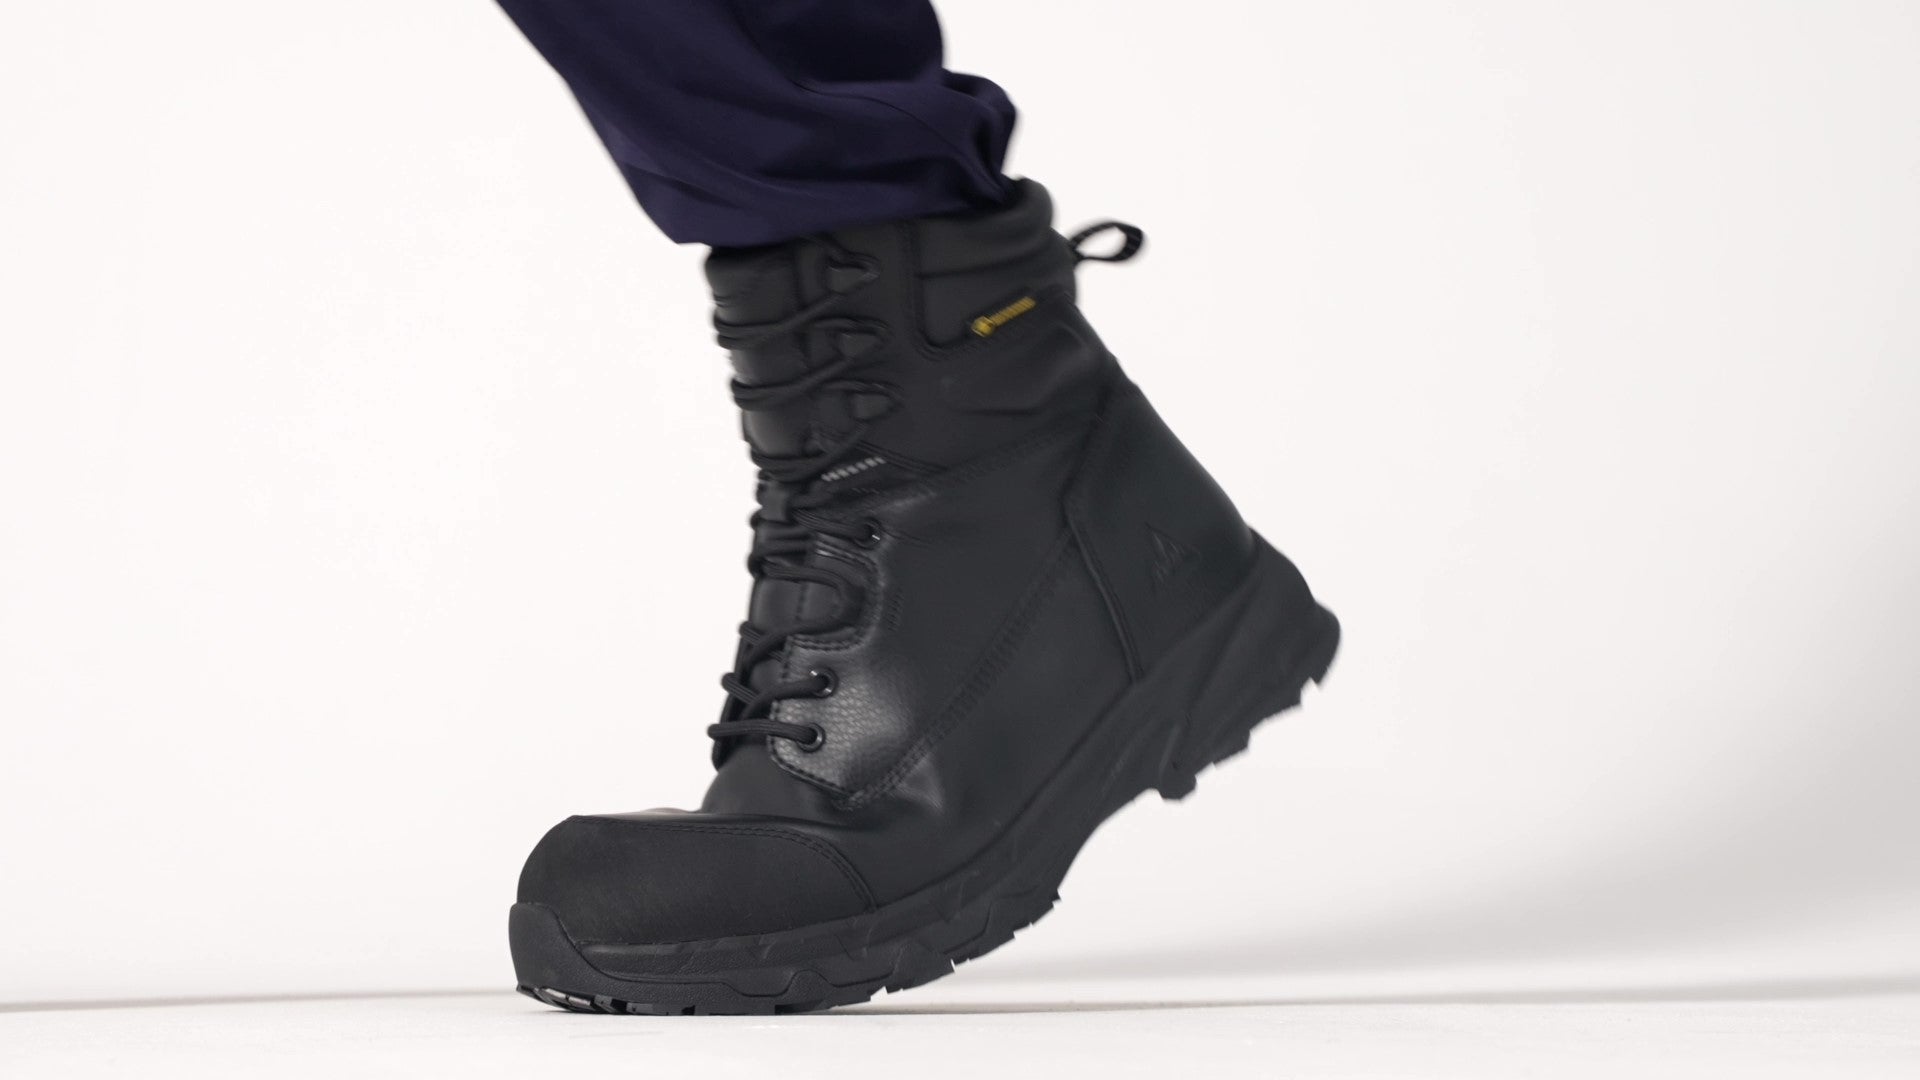 The Delvin from Shoes For Crews, the ultimate footwear for extreme conditions, product video.